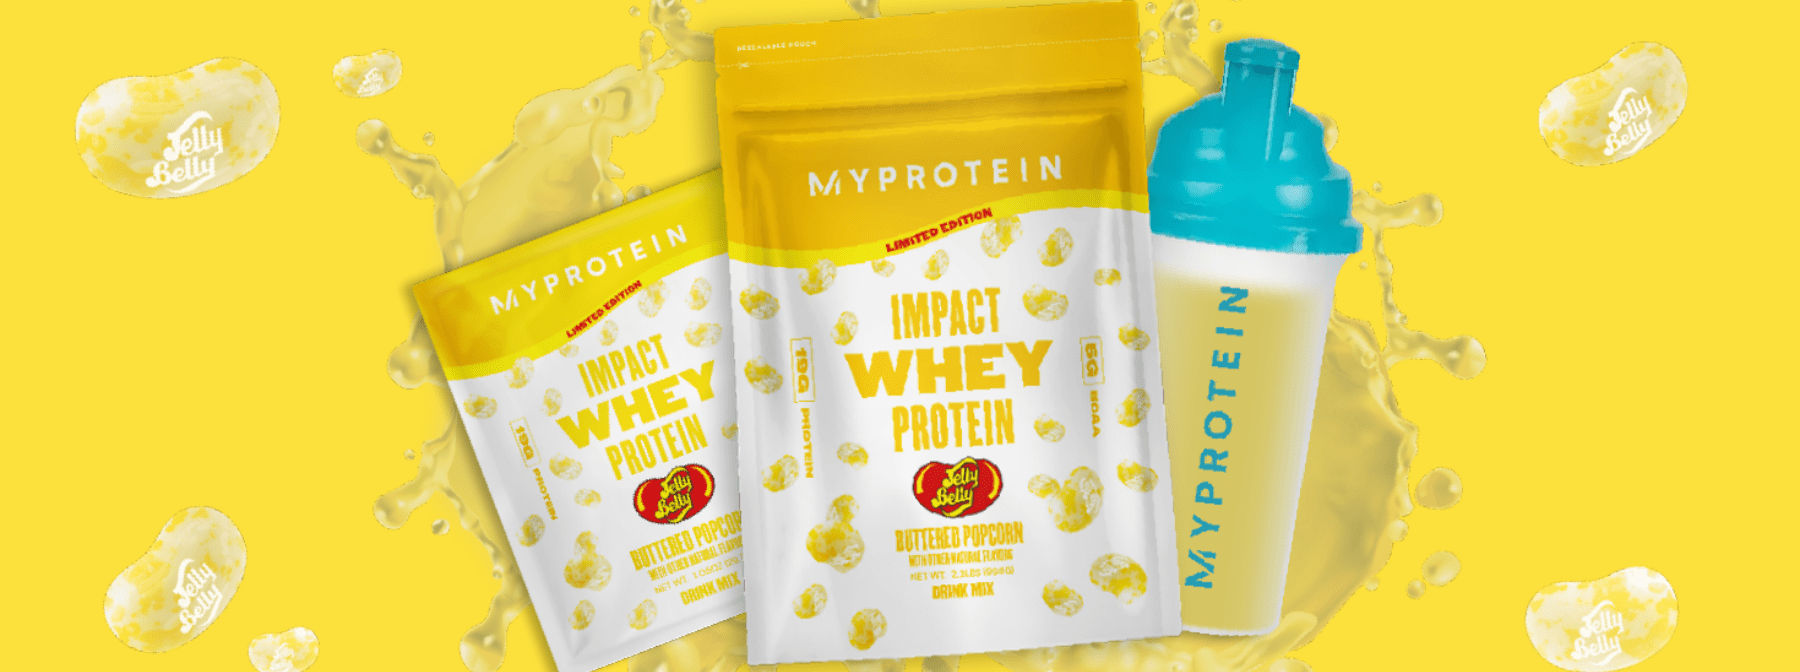 New Impact Whey Protein Flavor: Jelly Belly Buttered Popcorn